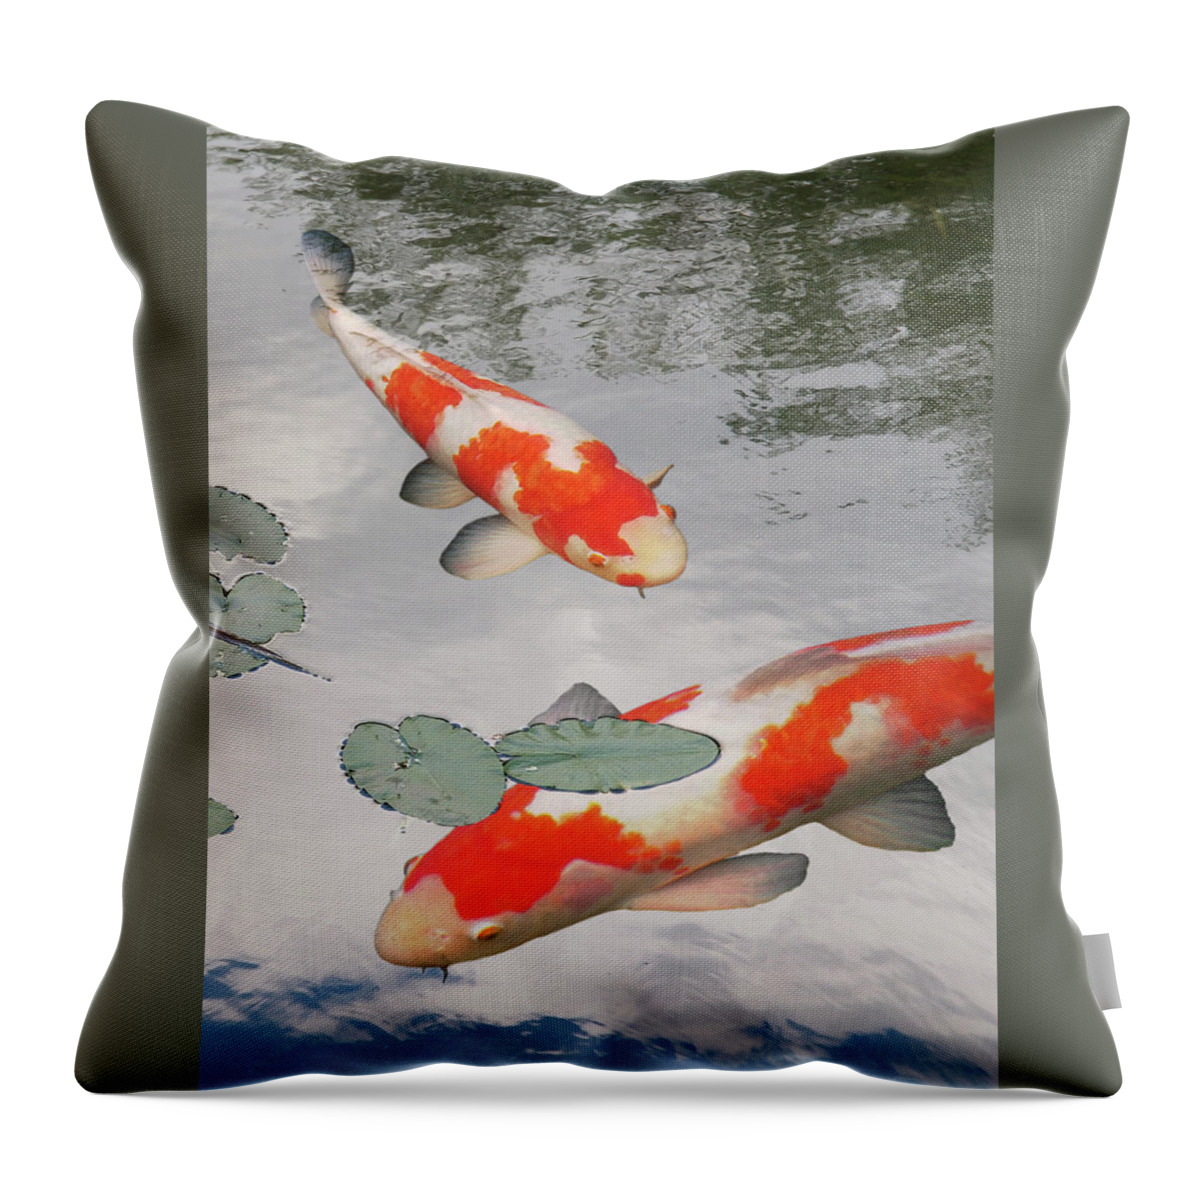 Japanese Koi Fish Throw Pillow featuring the photograph Serenity - Red And White Koi by Gill Billington